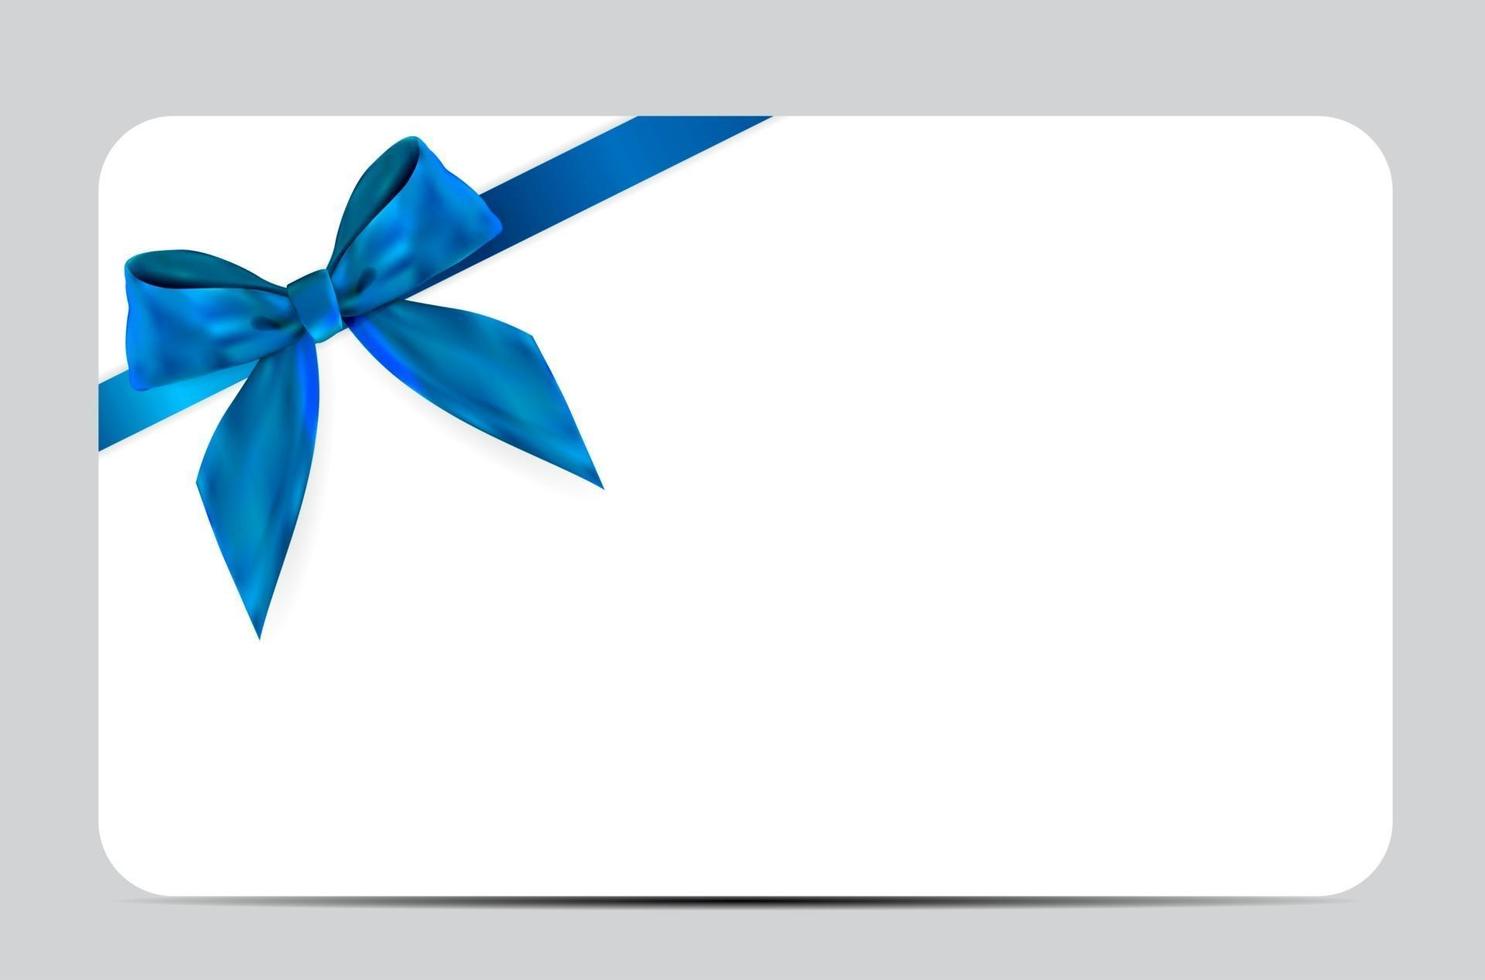 Blank Gift Card Template with Blue Bow and Ribbon. Vector Illustration for Your Business